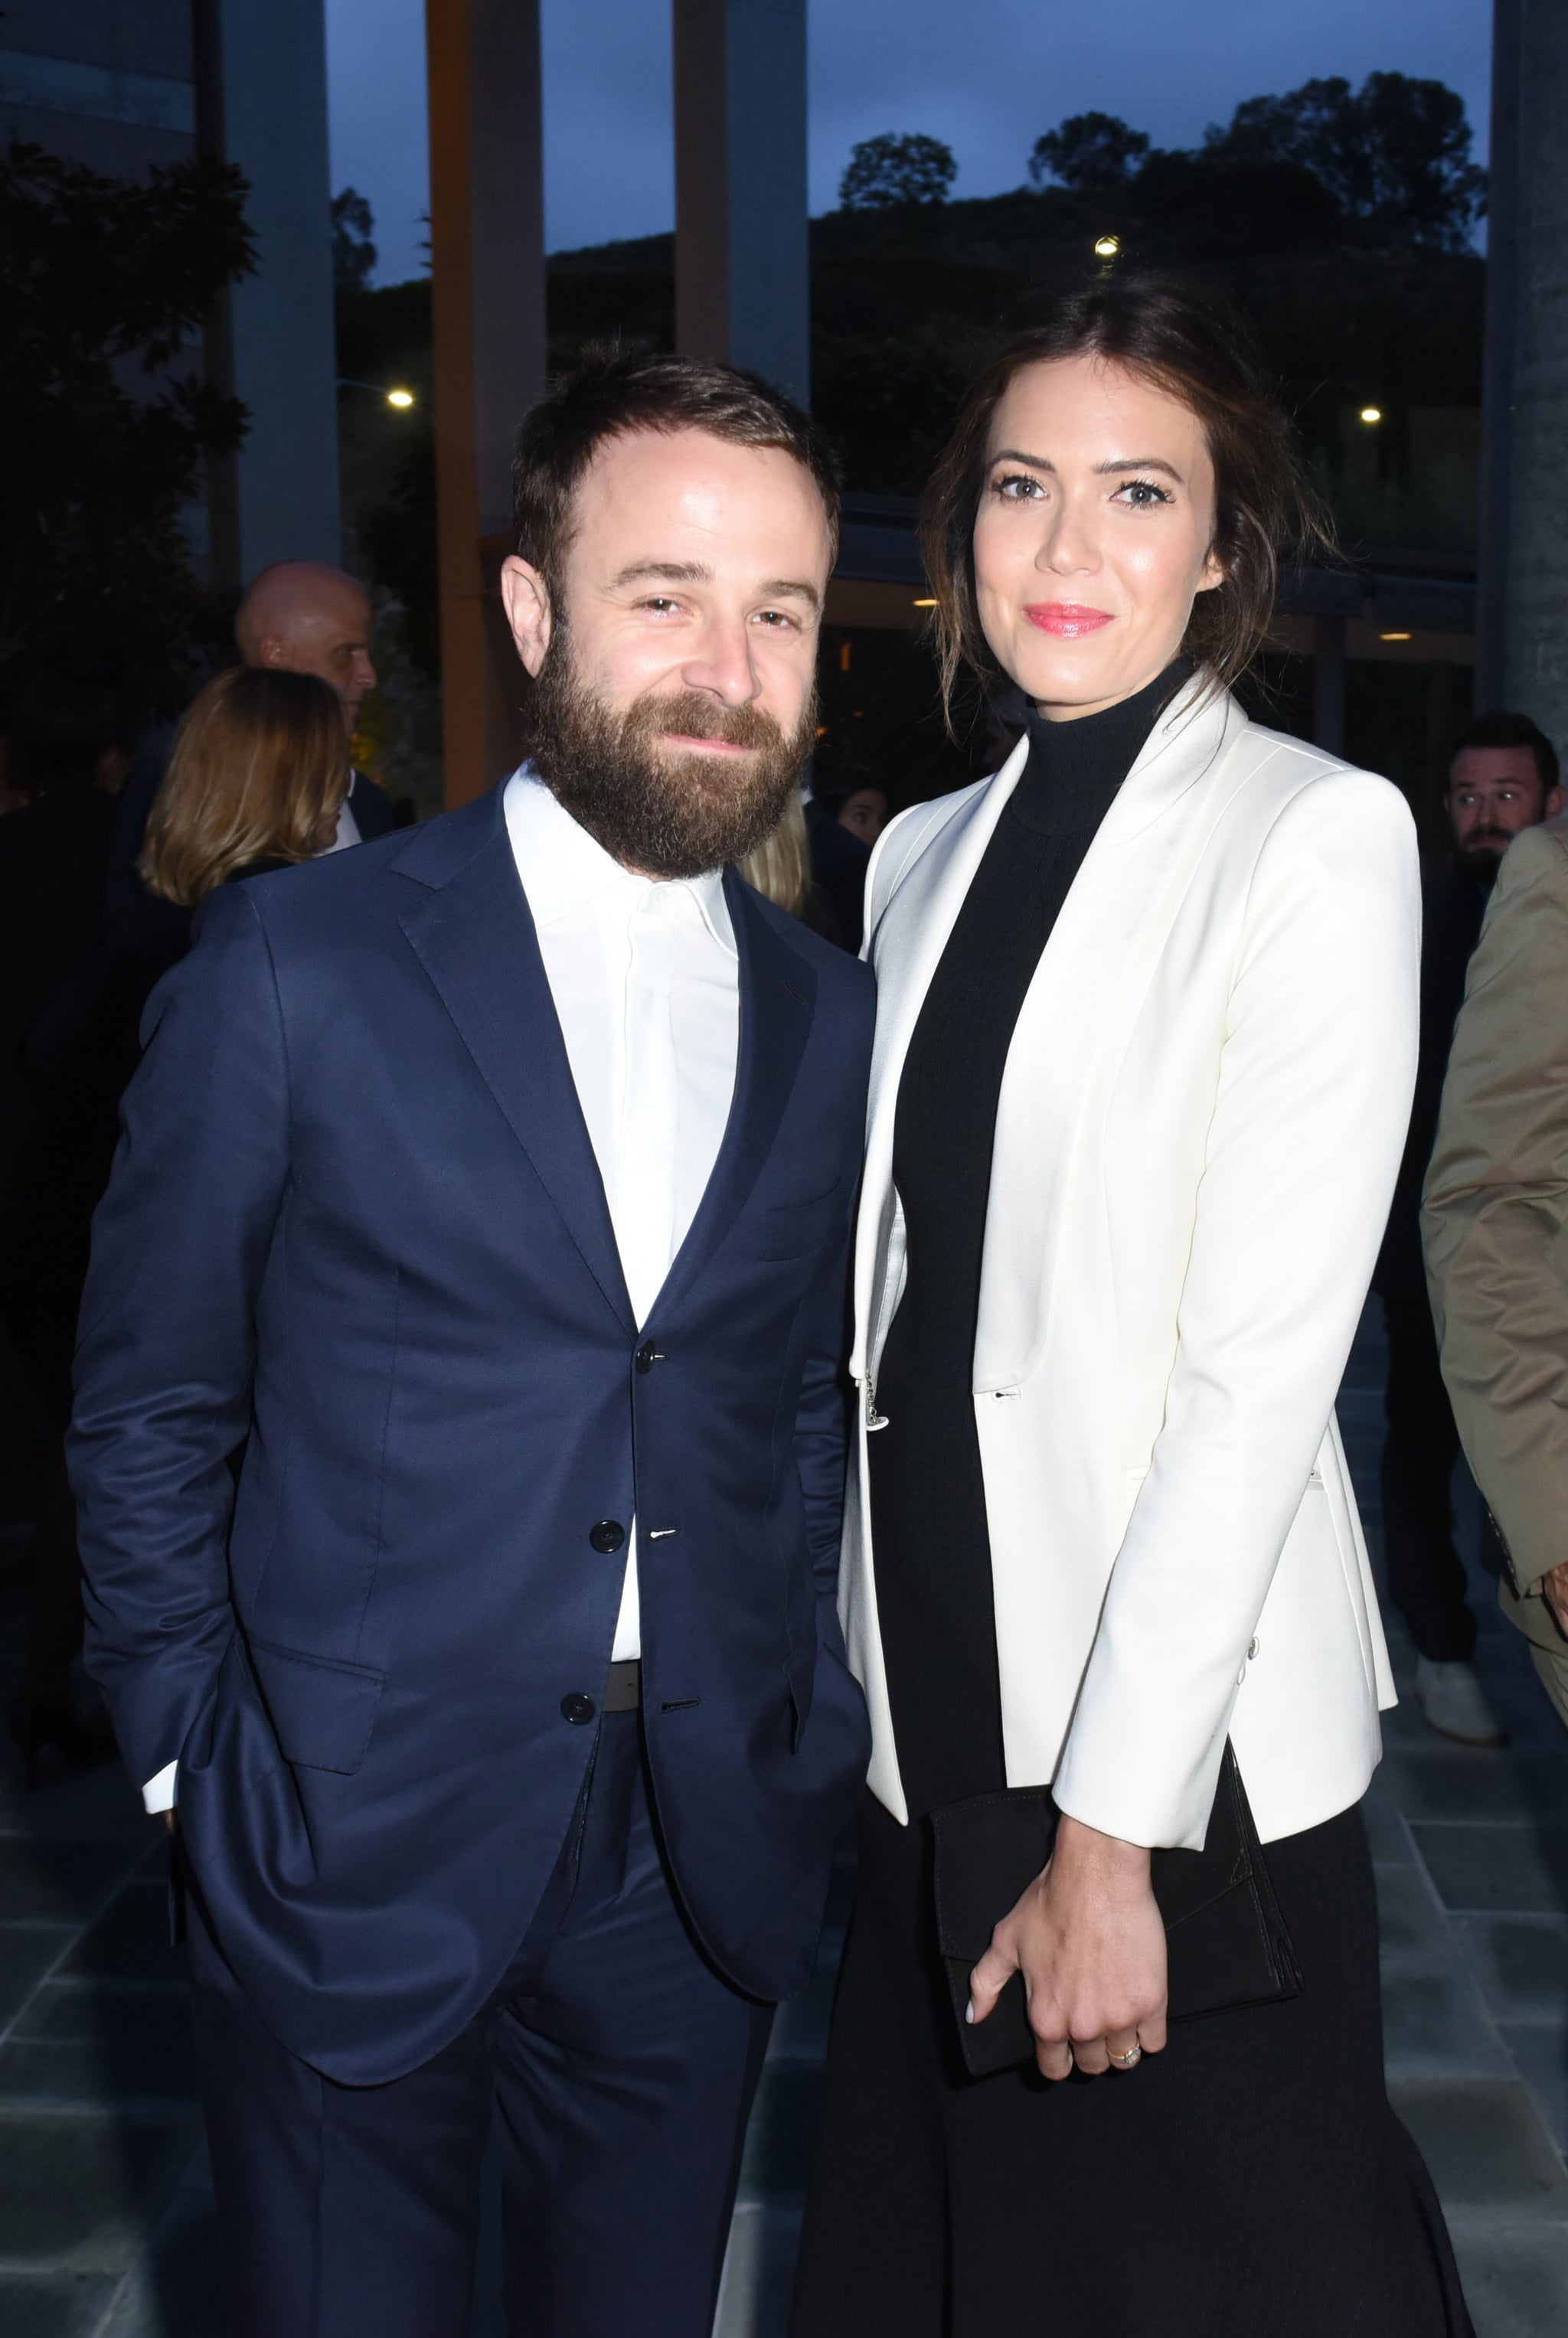 LOS ANGELES, CA - MAY 01:  Taylor Goldsmith and Mandy Moore attend Communities in Schools Annual Celebration on May 1, 2018 in Los Angeles, California.  (Photo by Vivien Killilea/Getty Images for Communities in Schools of Los Angeles)